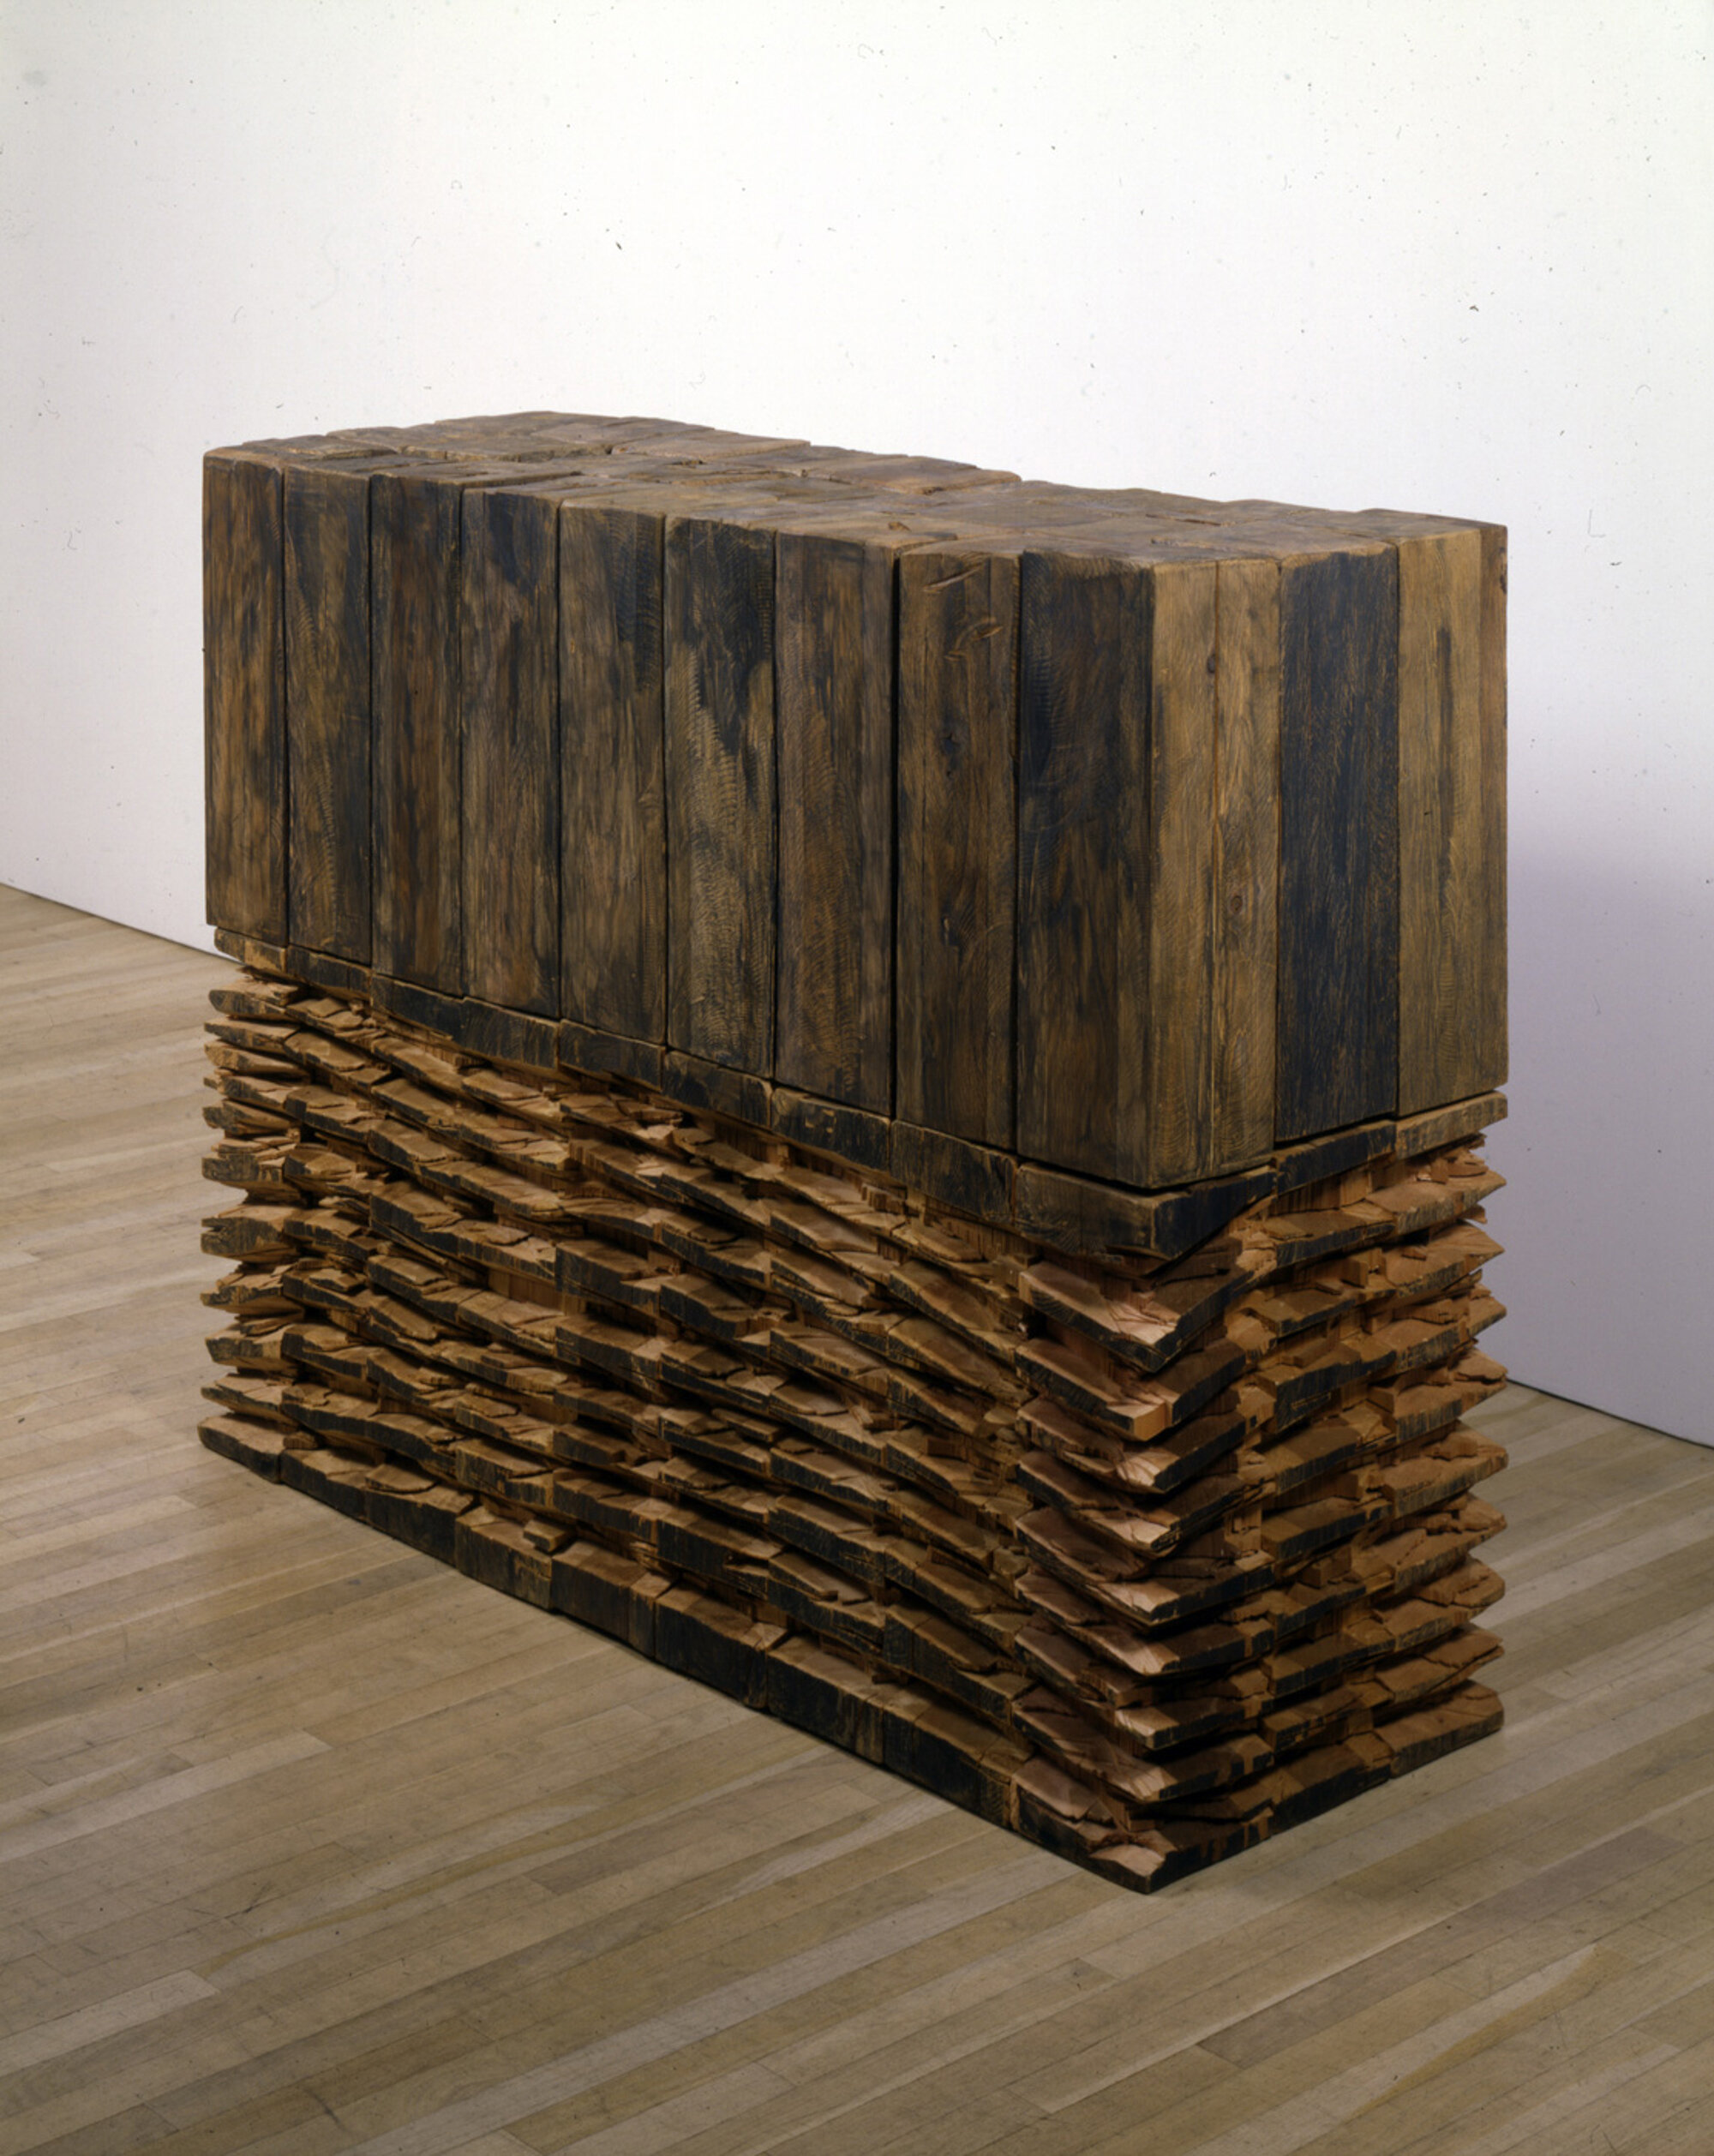       Pink Companion , 1991 Cedar and graphite 46.5 x 61 x 20.5 in.    Lorence Monk Gallery  